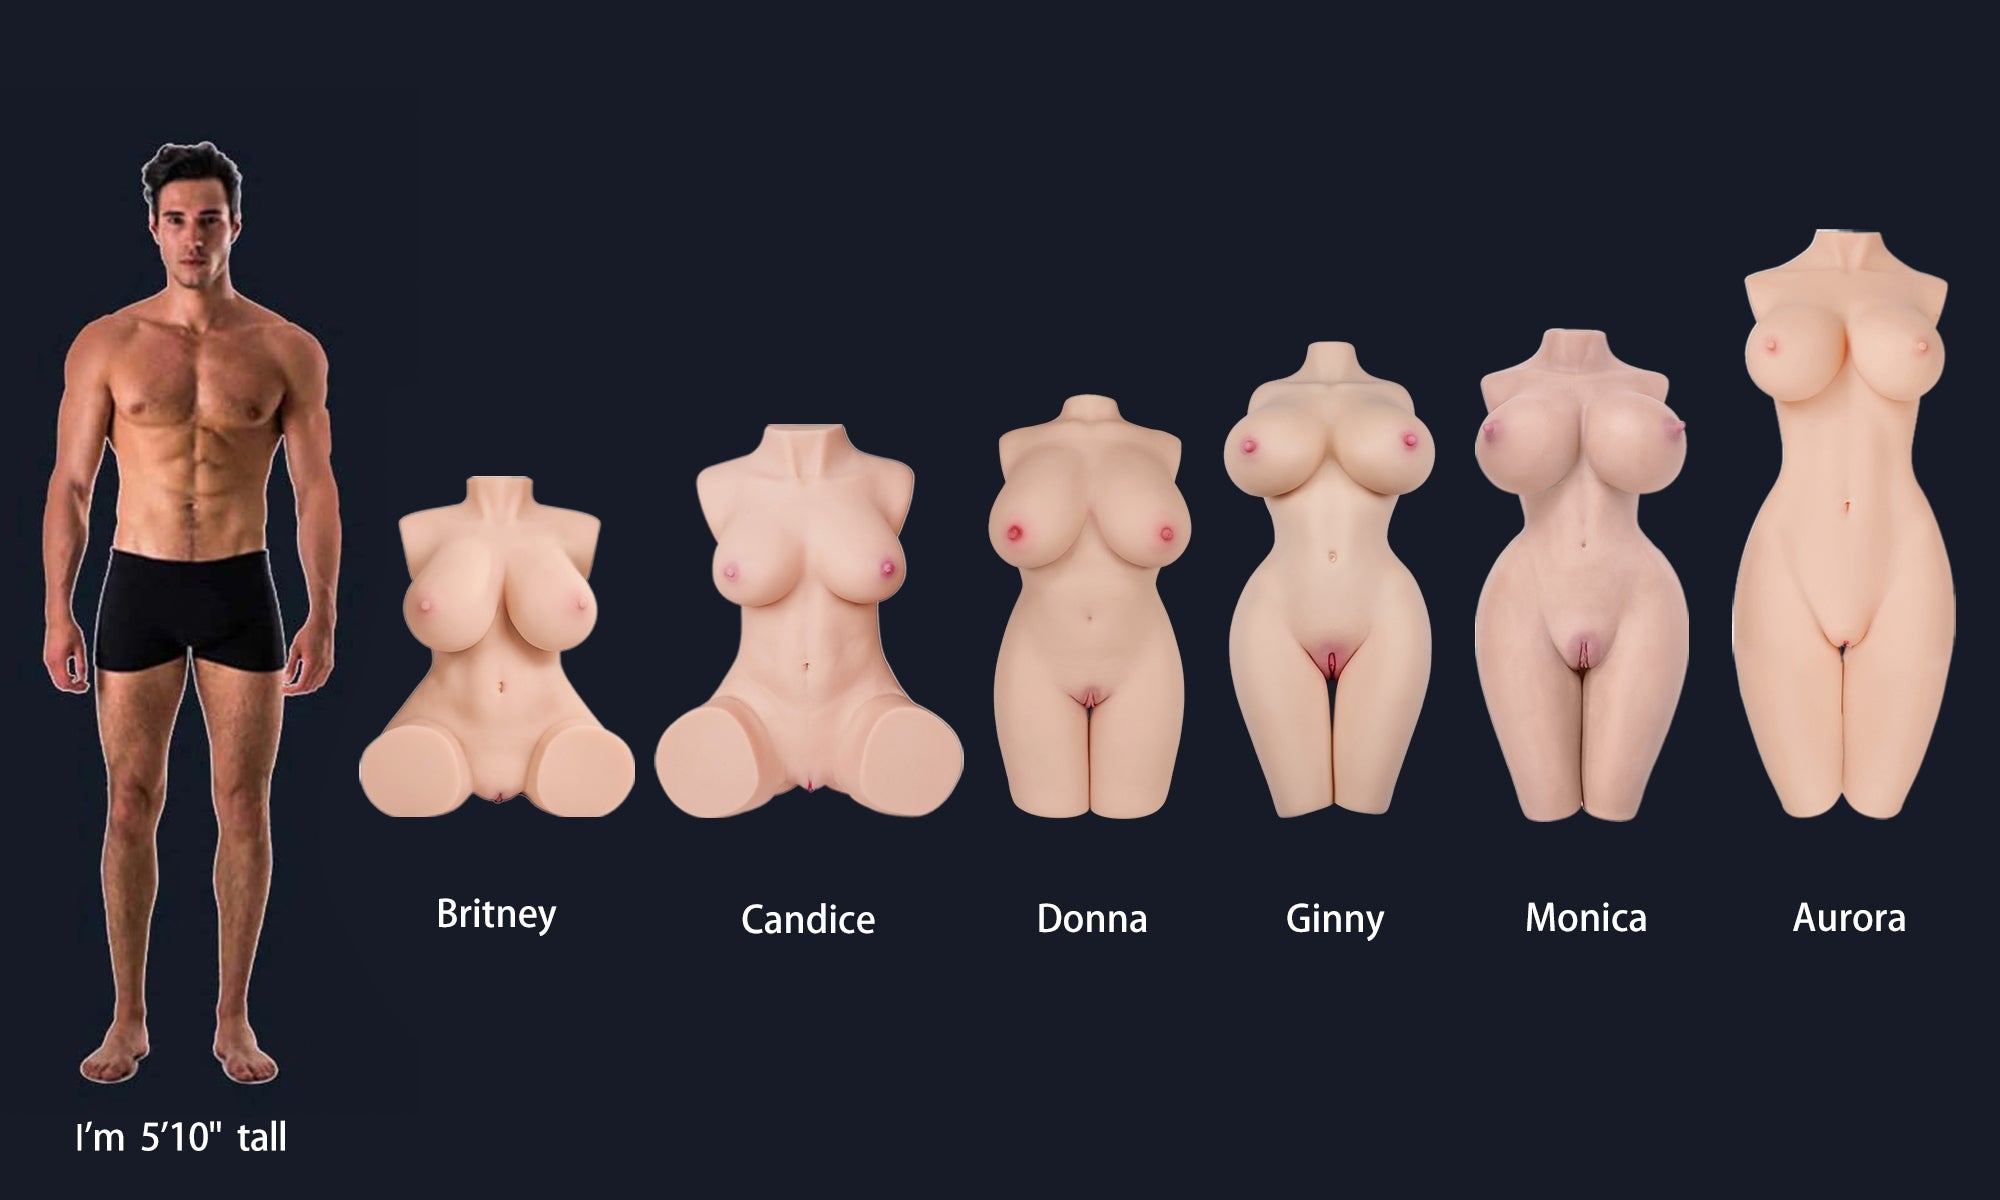 britney doll comparison with  other hot dolls.jpeg__PID:8d7a3fa0-2d89-47e1-b870-512451334134